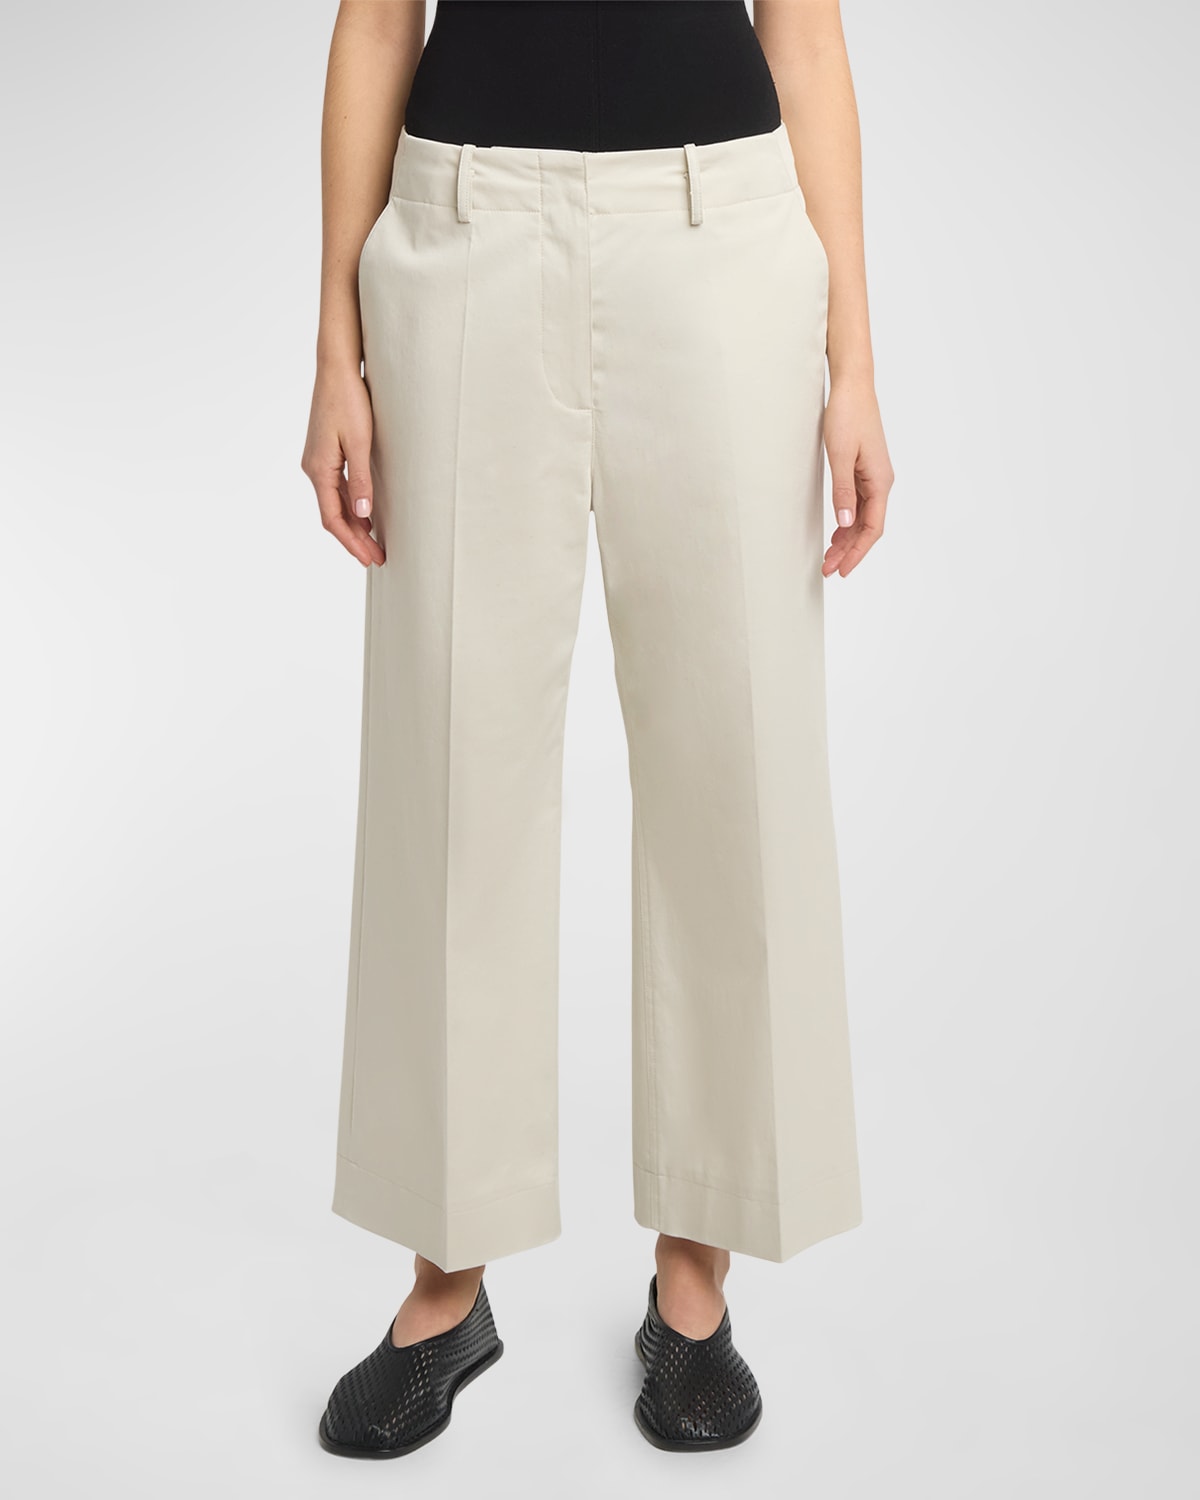 Amara Cotton Twill Suiting Cropped Pants